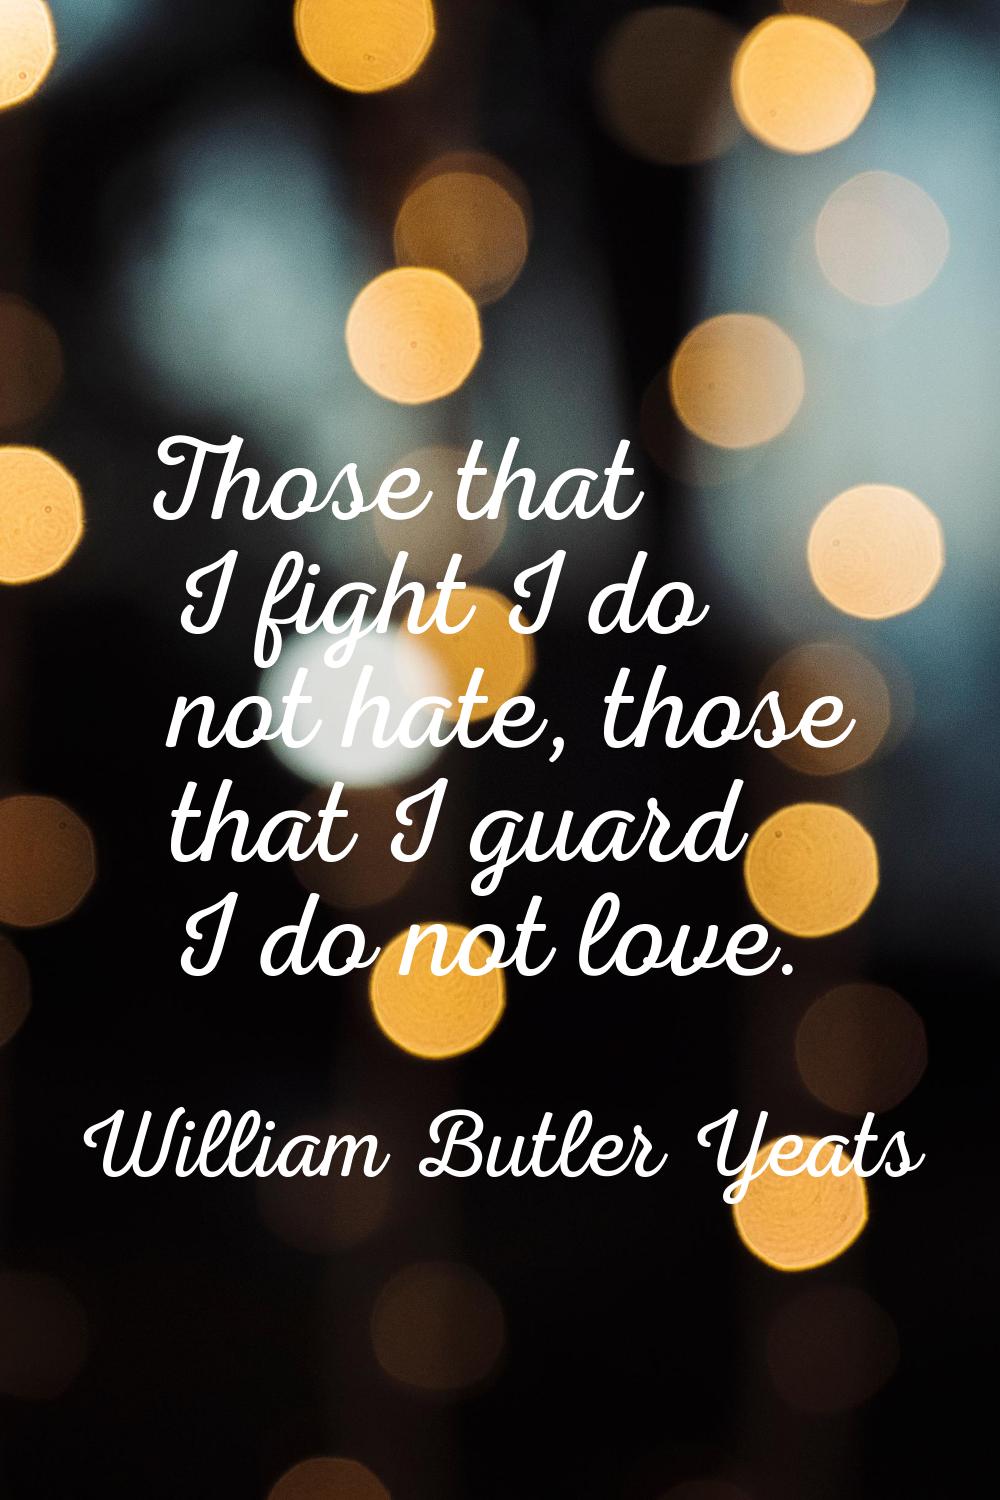 Those that I fight I do not hate, those that I guard I do not love.